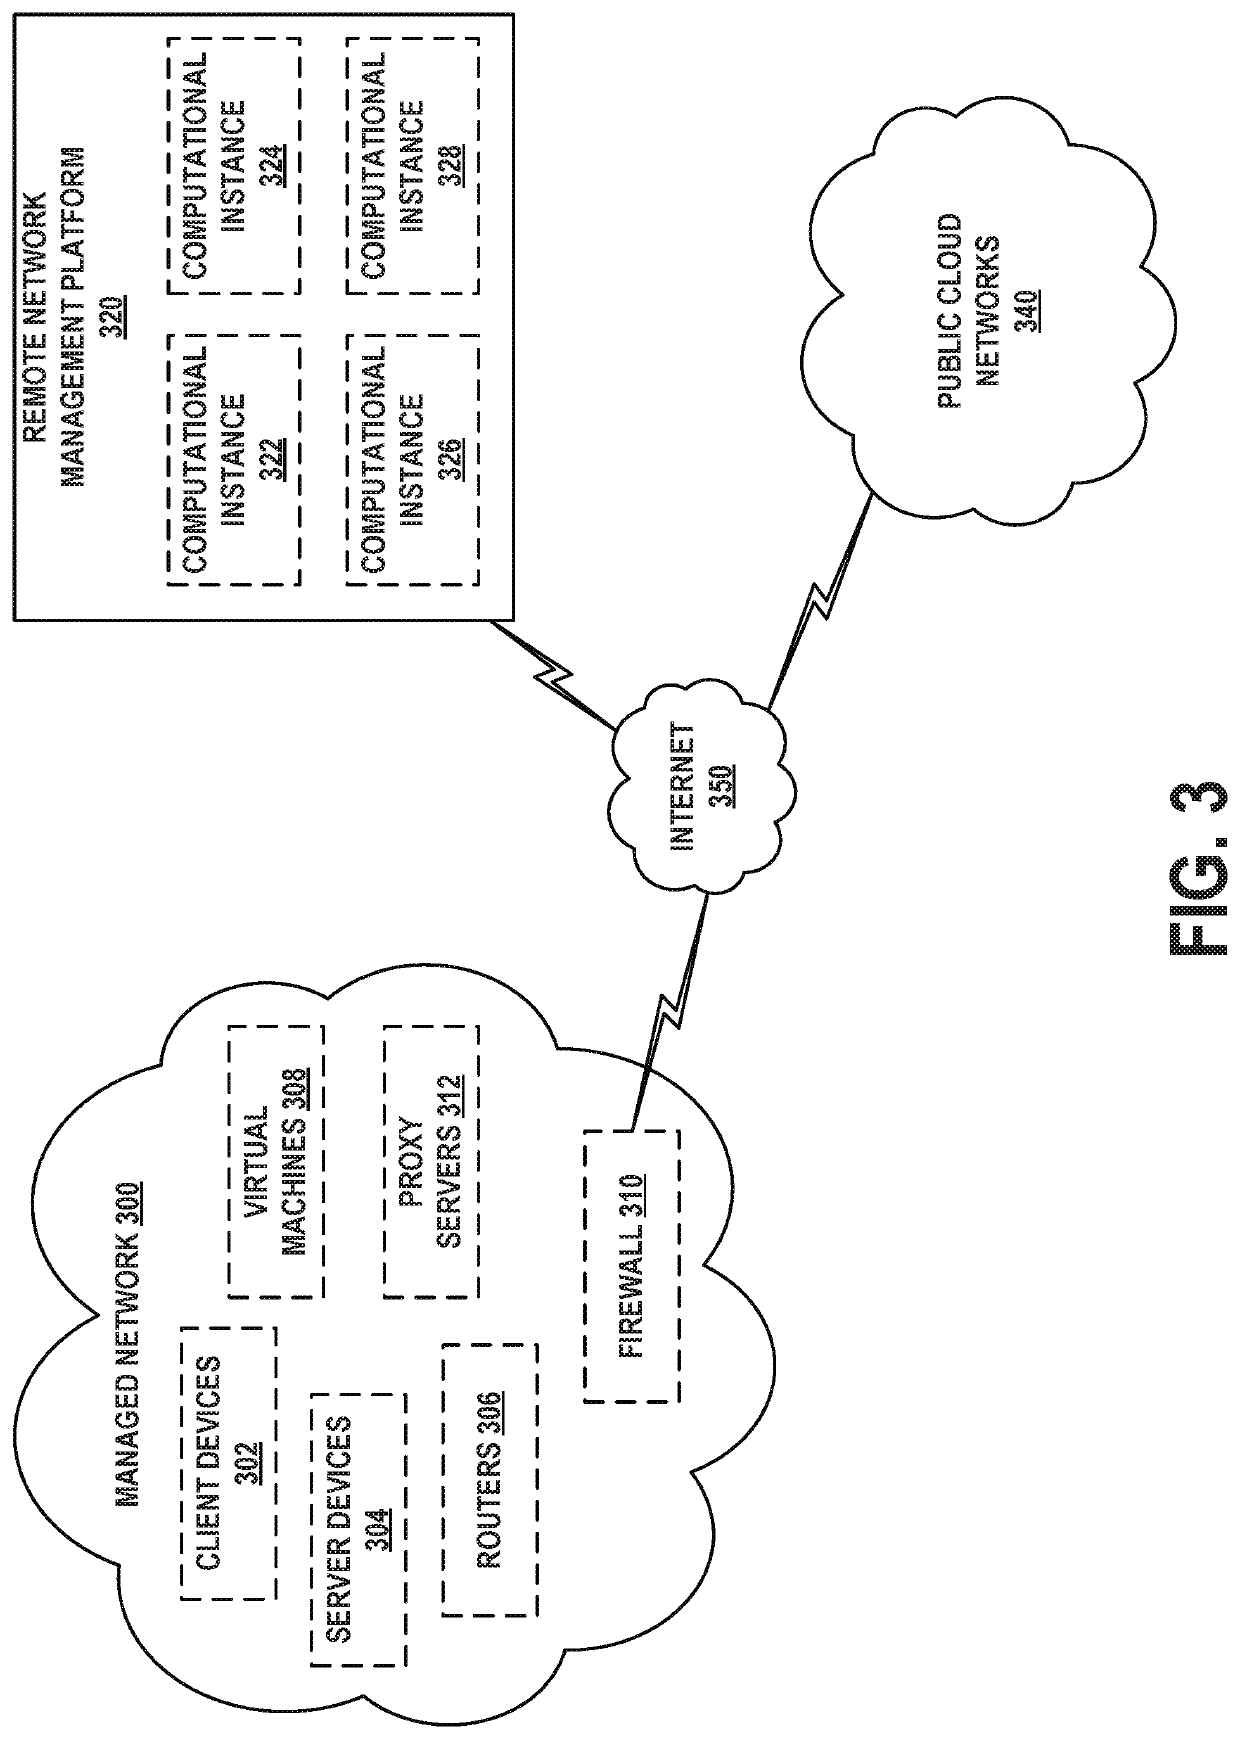 Automatic restructuring of graphical user interface components based on user interaction